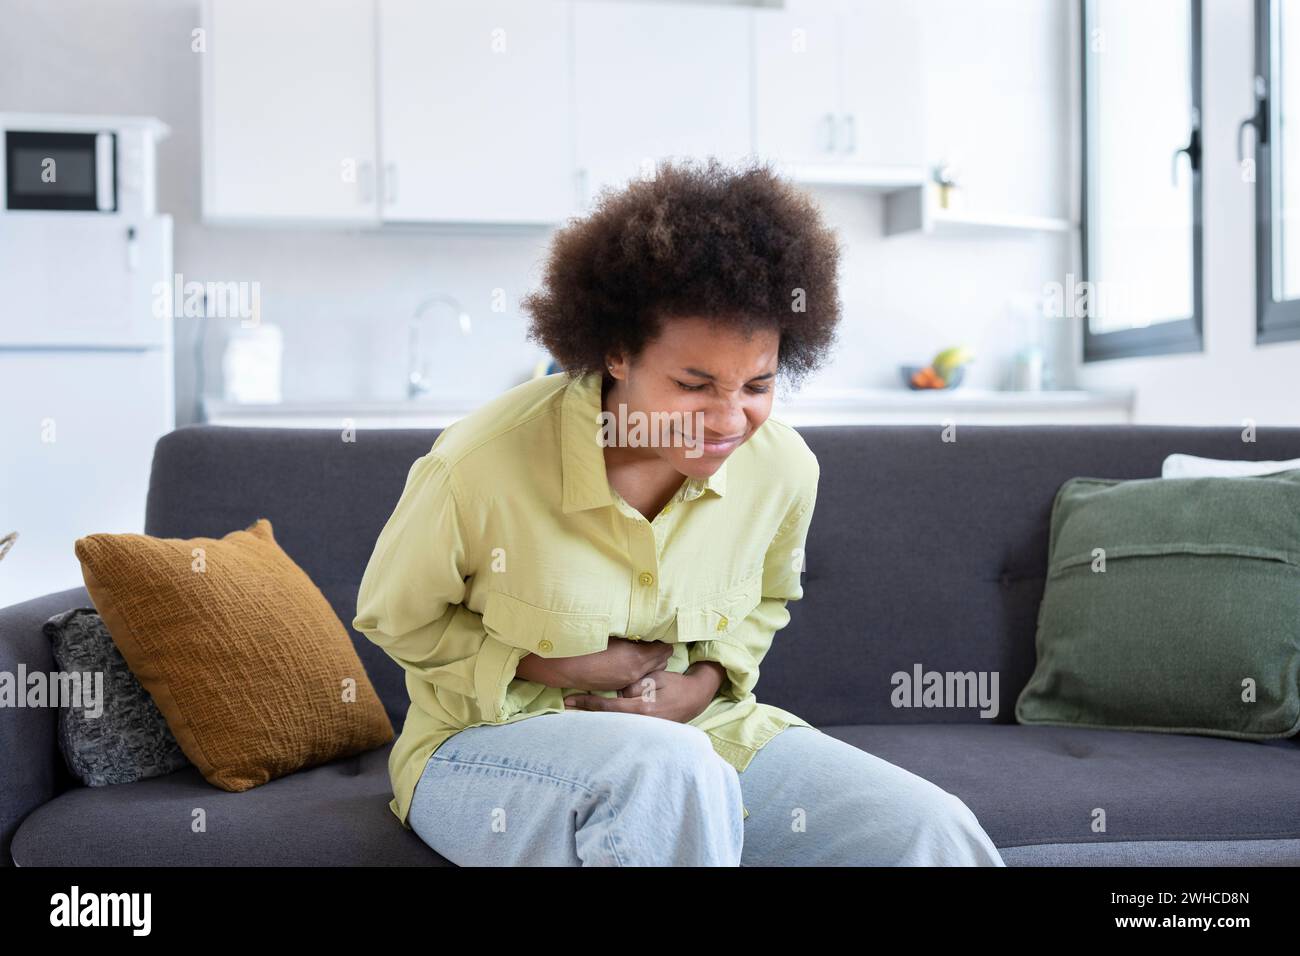 Sick young woman in pain holding belly stomach feeling hurt abdomen ache gastritis pancreatitis symptoms or diarrhea, upset teen girl suffering from indigestion flatulence abdominal problem concept Stock Photo